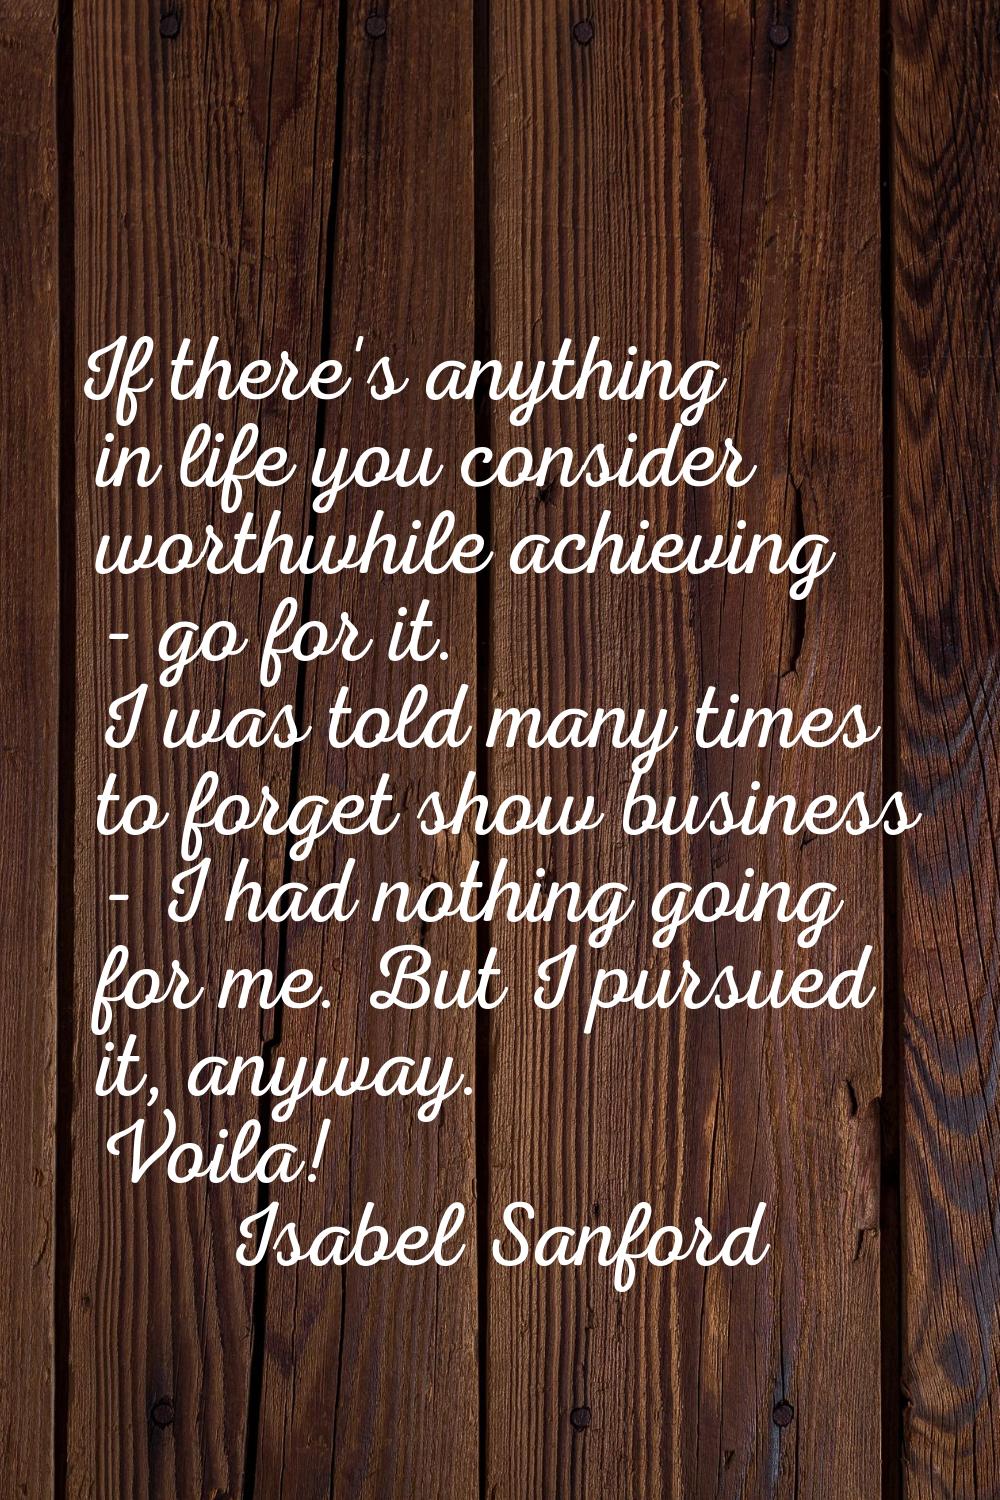 If there's anything in life you consider worthwhile achieving - go for it. I was told many times to